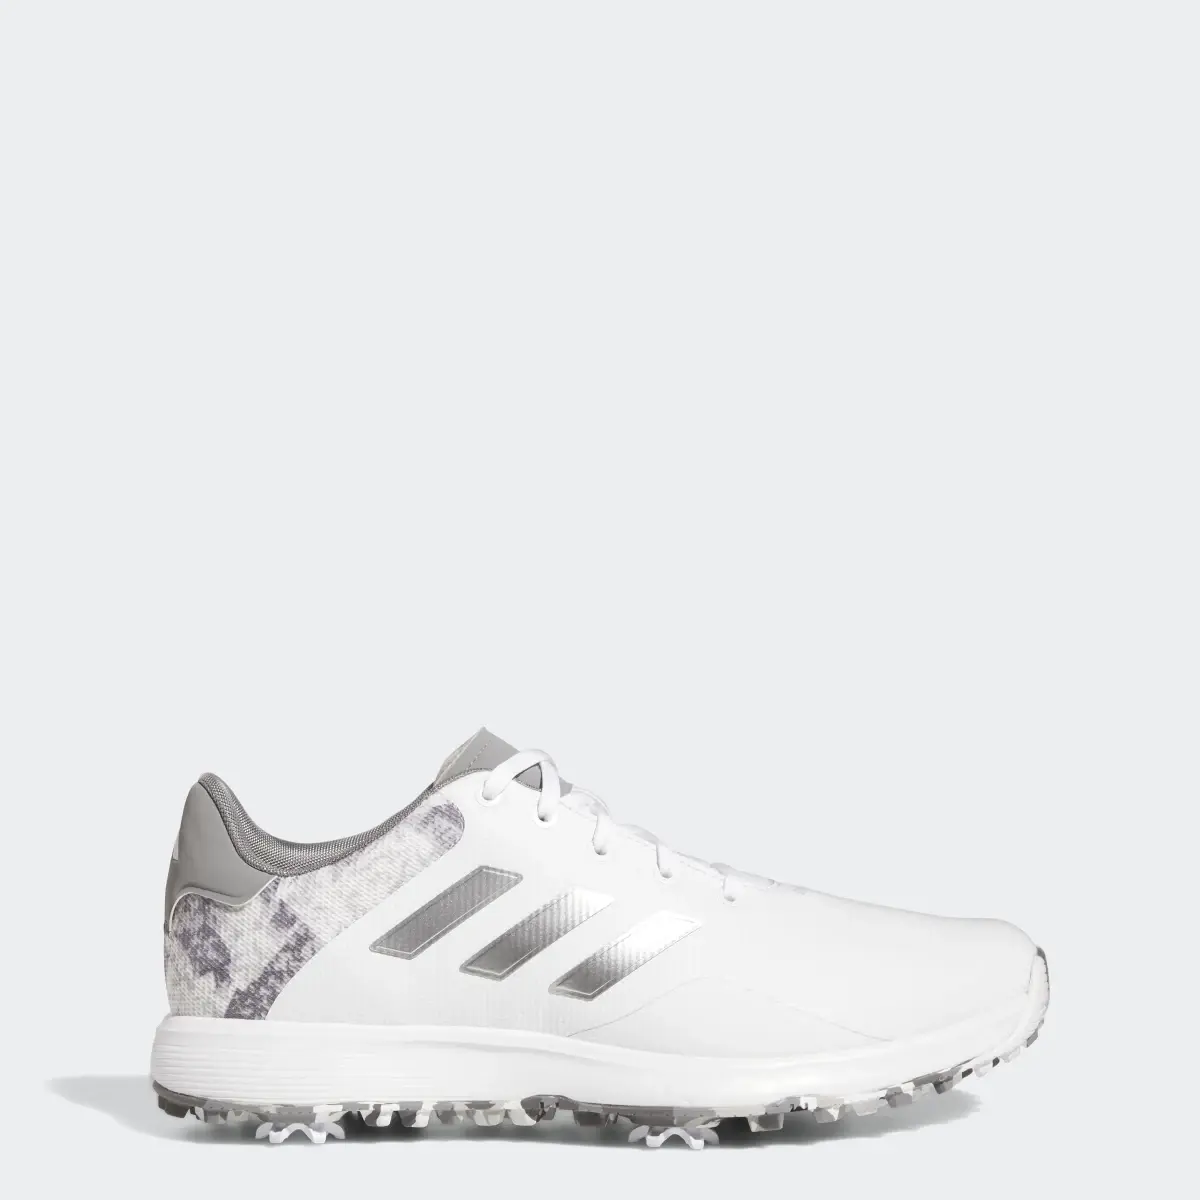 Adidas S2G Golf Shoes. 1